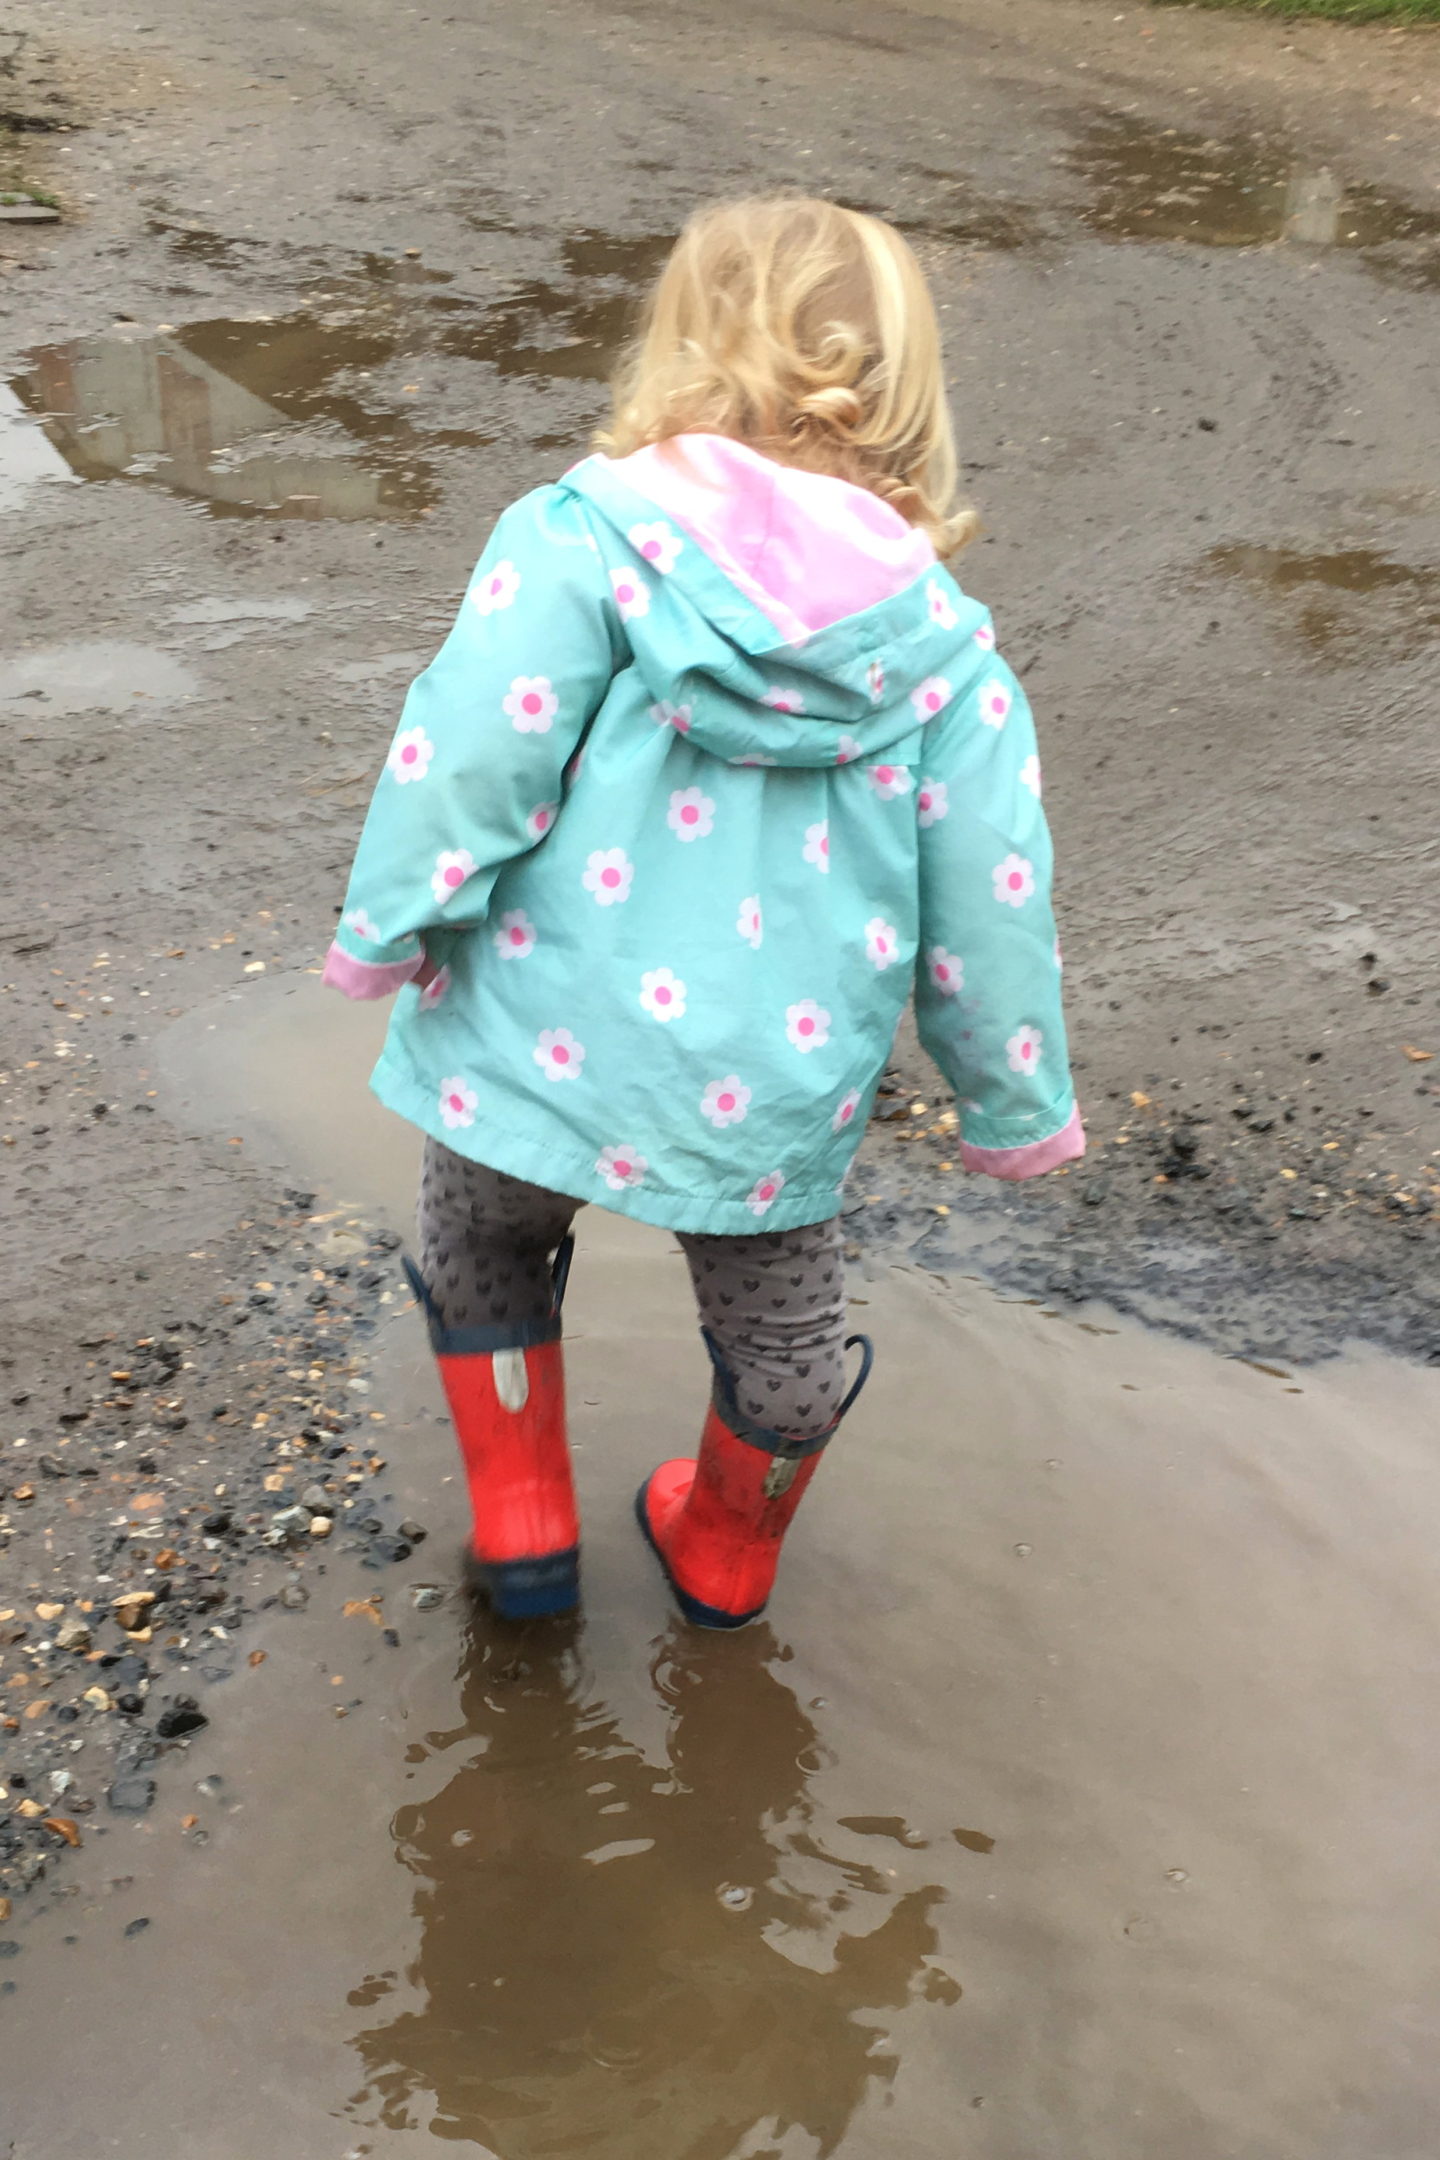 22 months old girl splashing in puddles in red wellies